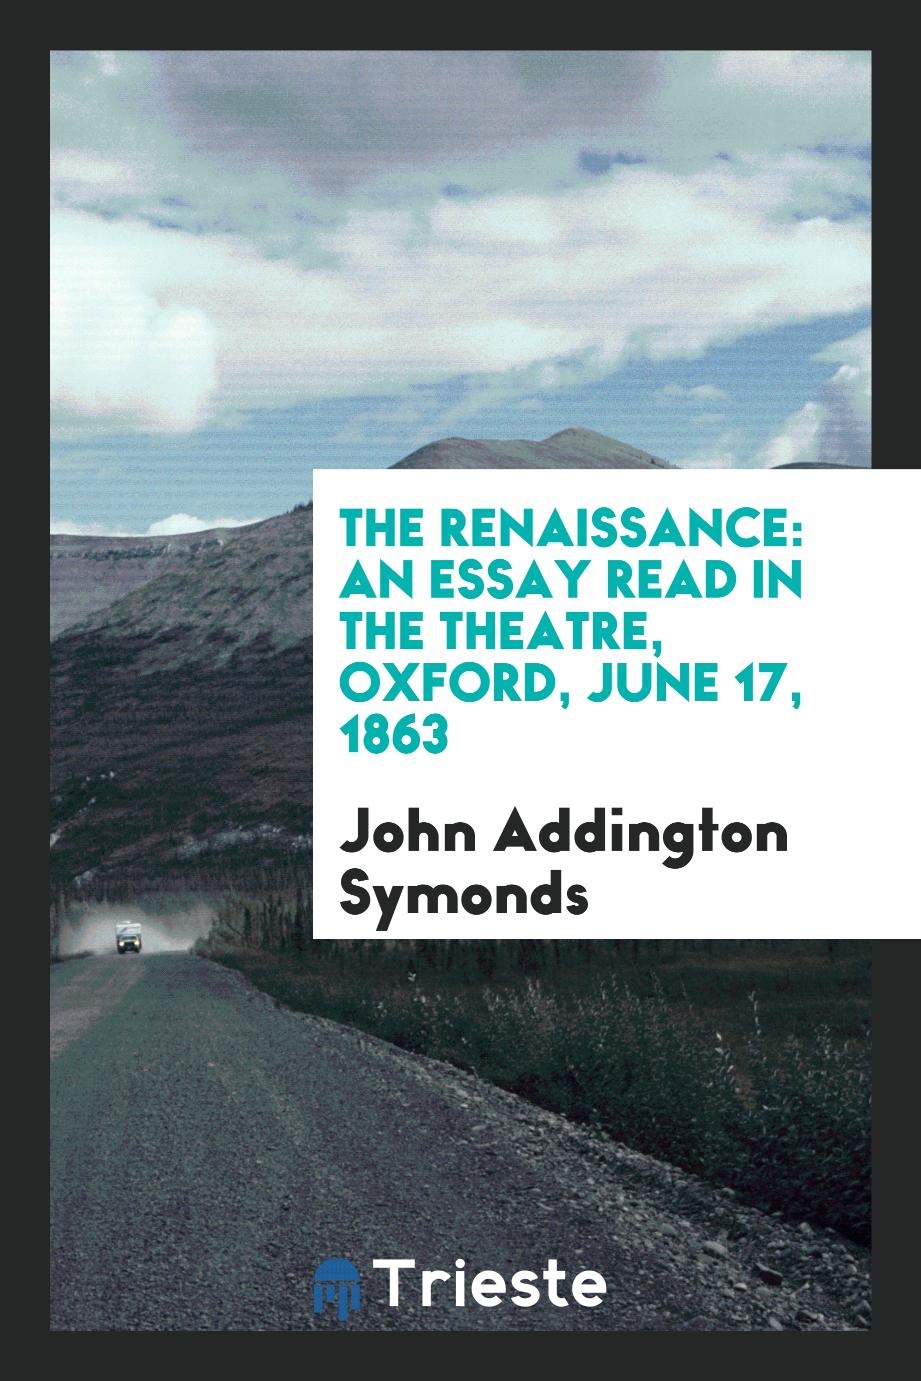 The Renaissance: An Essay Read in the Theatre, Oxford, June 17, 1863